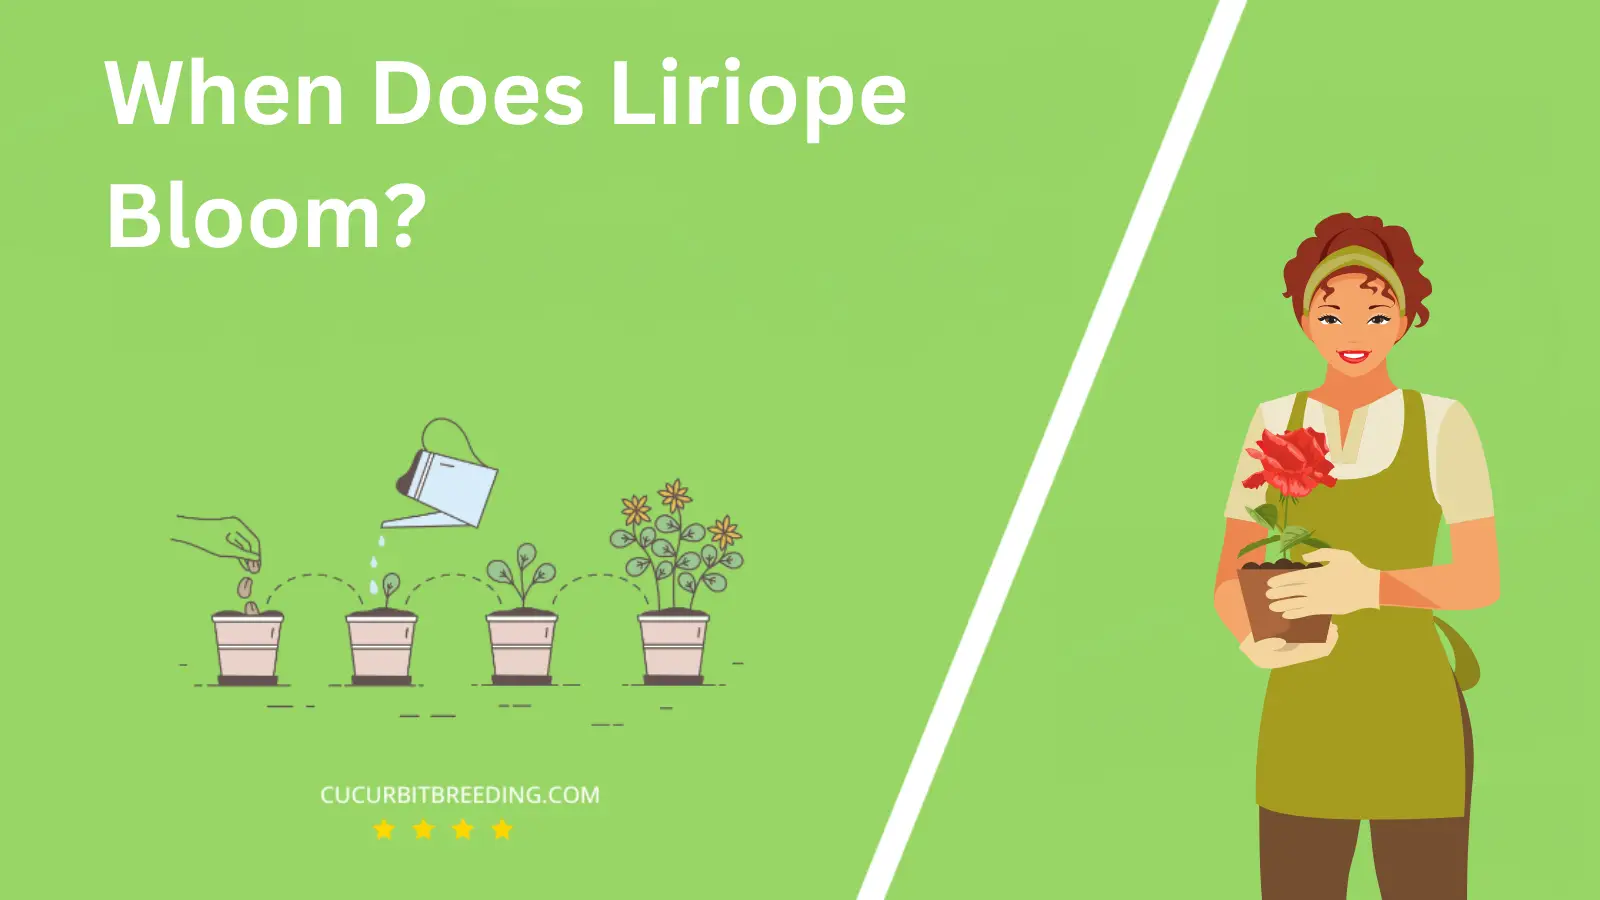 When Does Liriope Bloom?